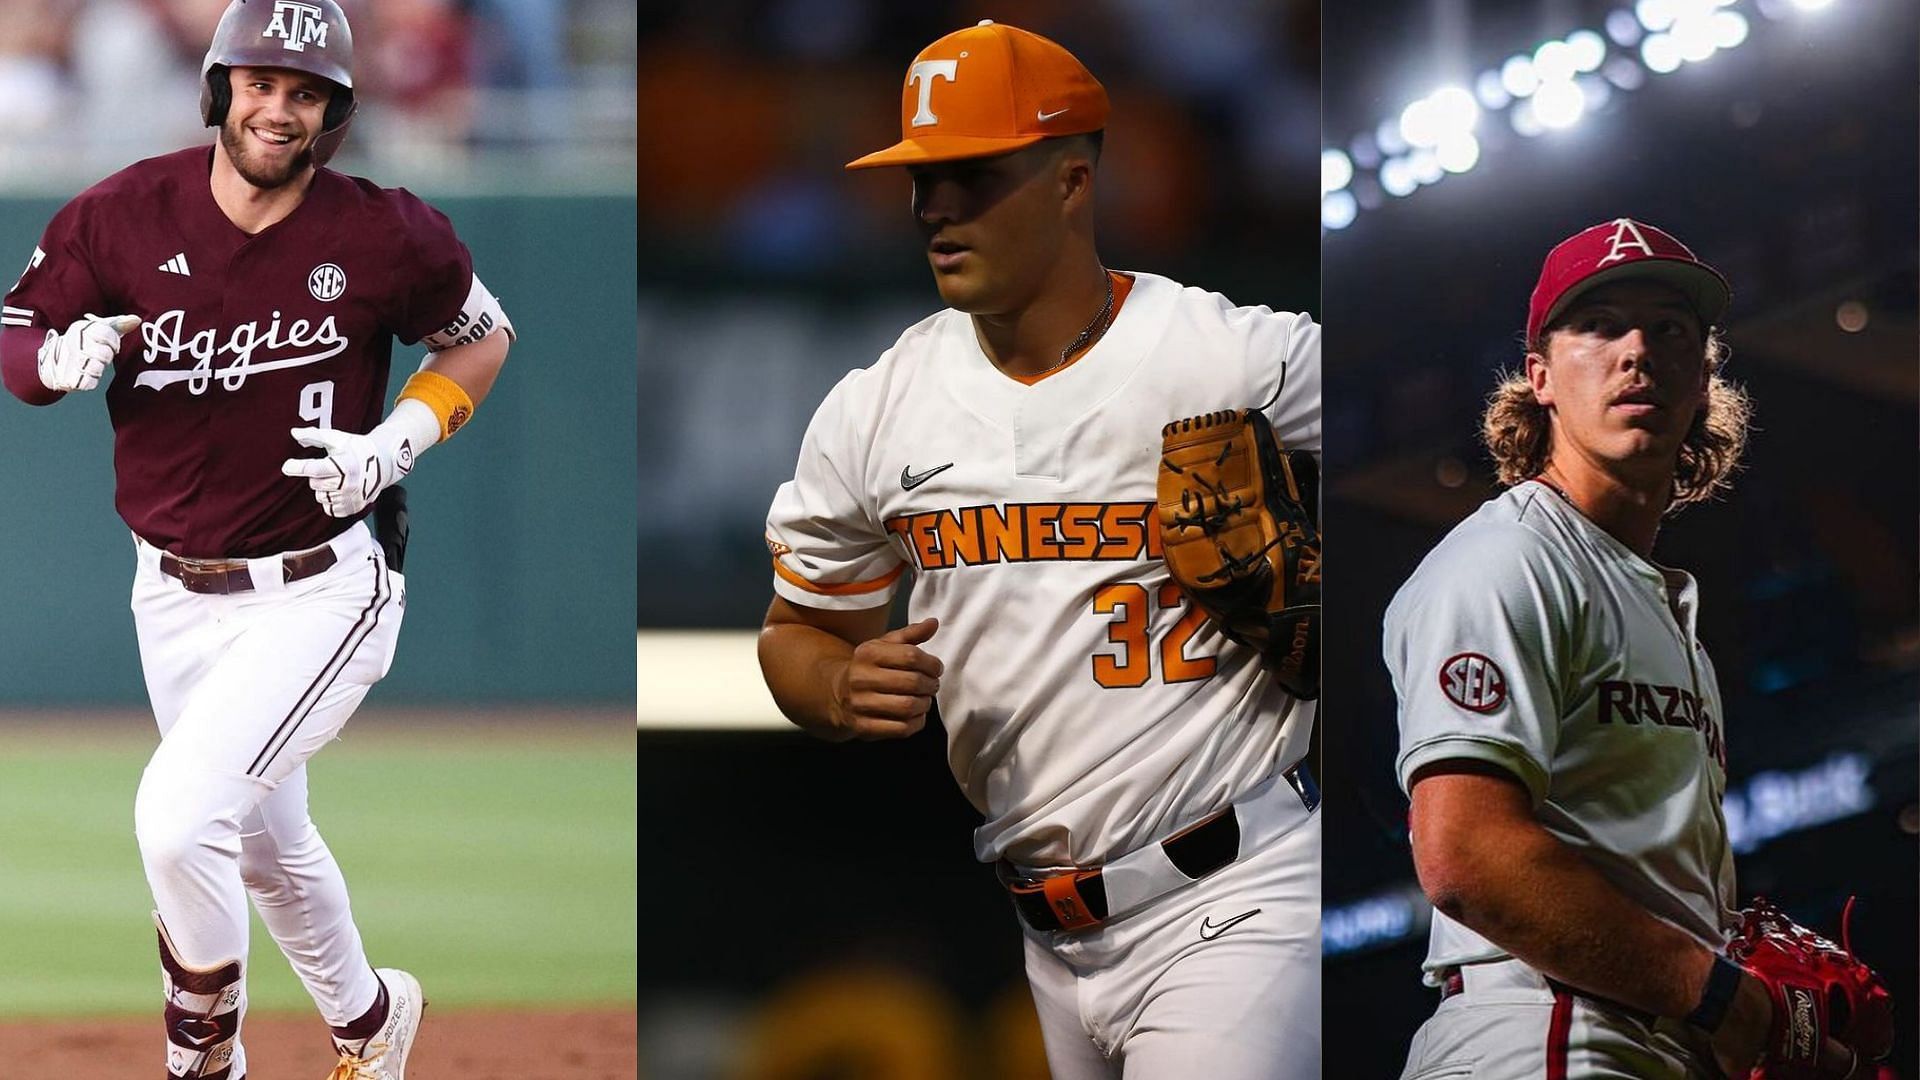 The SEC baseball tournament will have a hybrid format for the last season